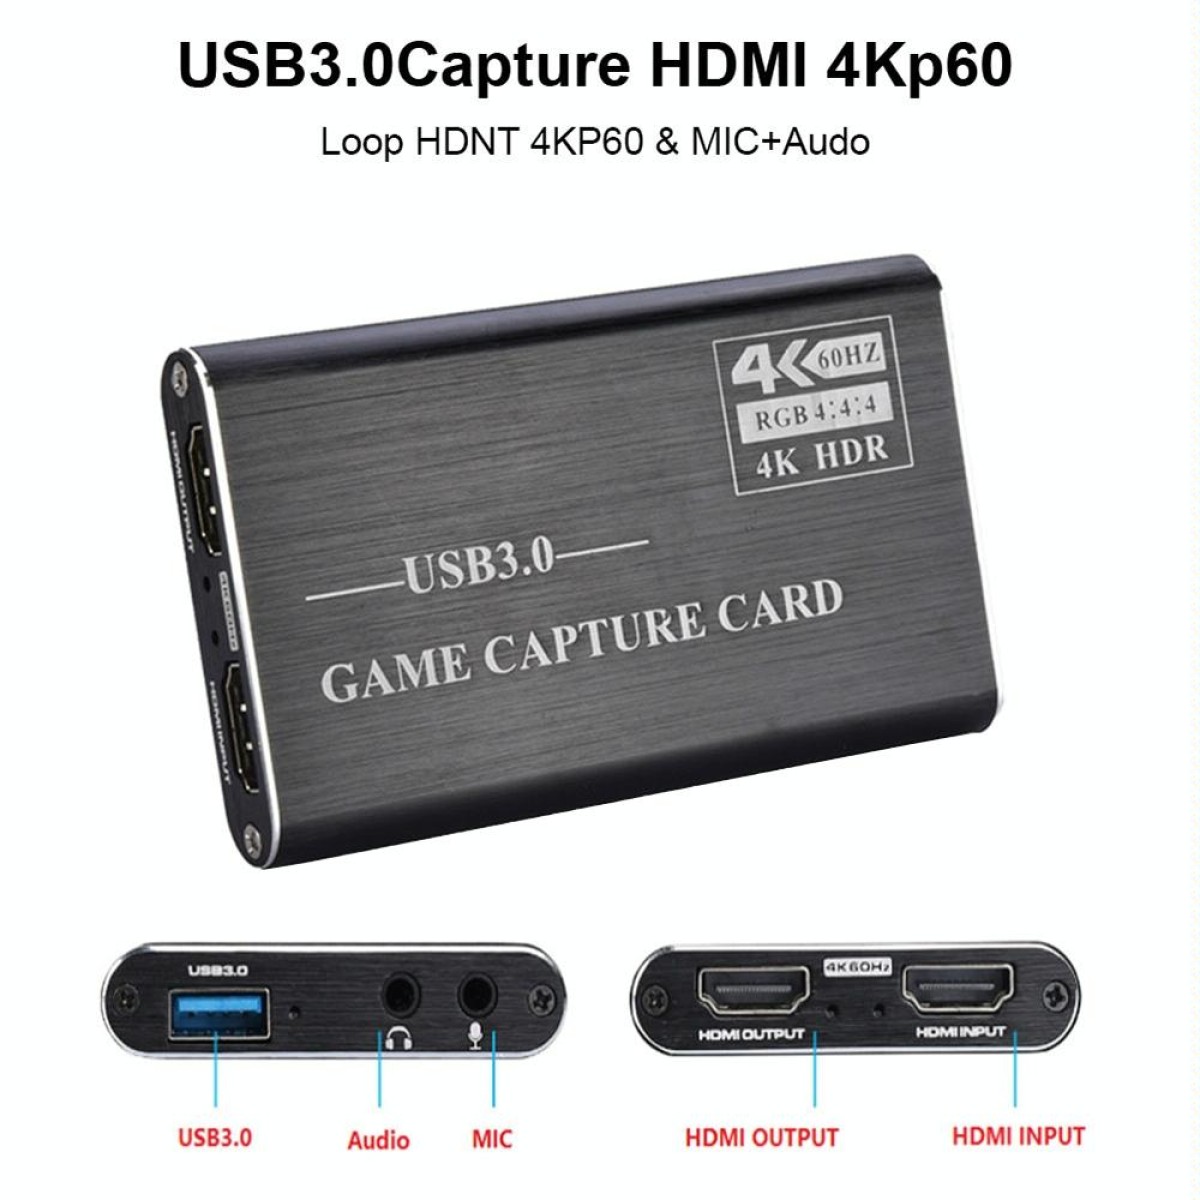 NK-S41 USB 3.0 to HDMI 4K HD Video Capture Card Device (Grey)